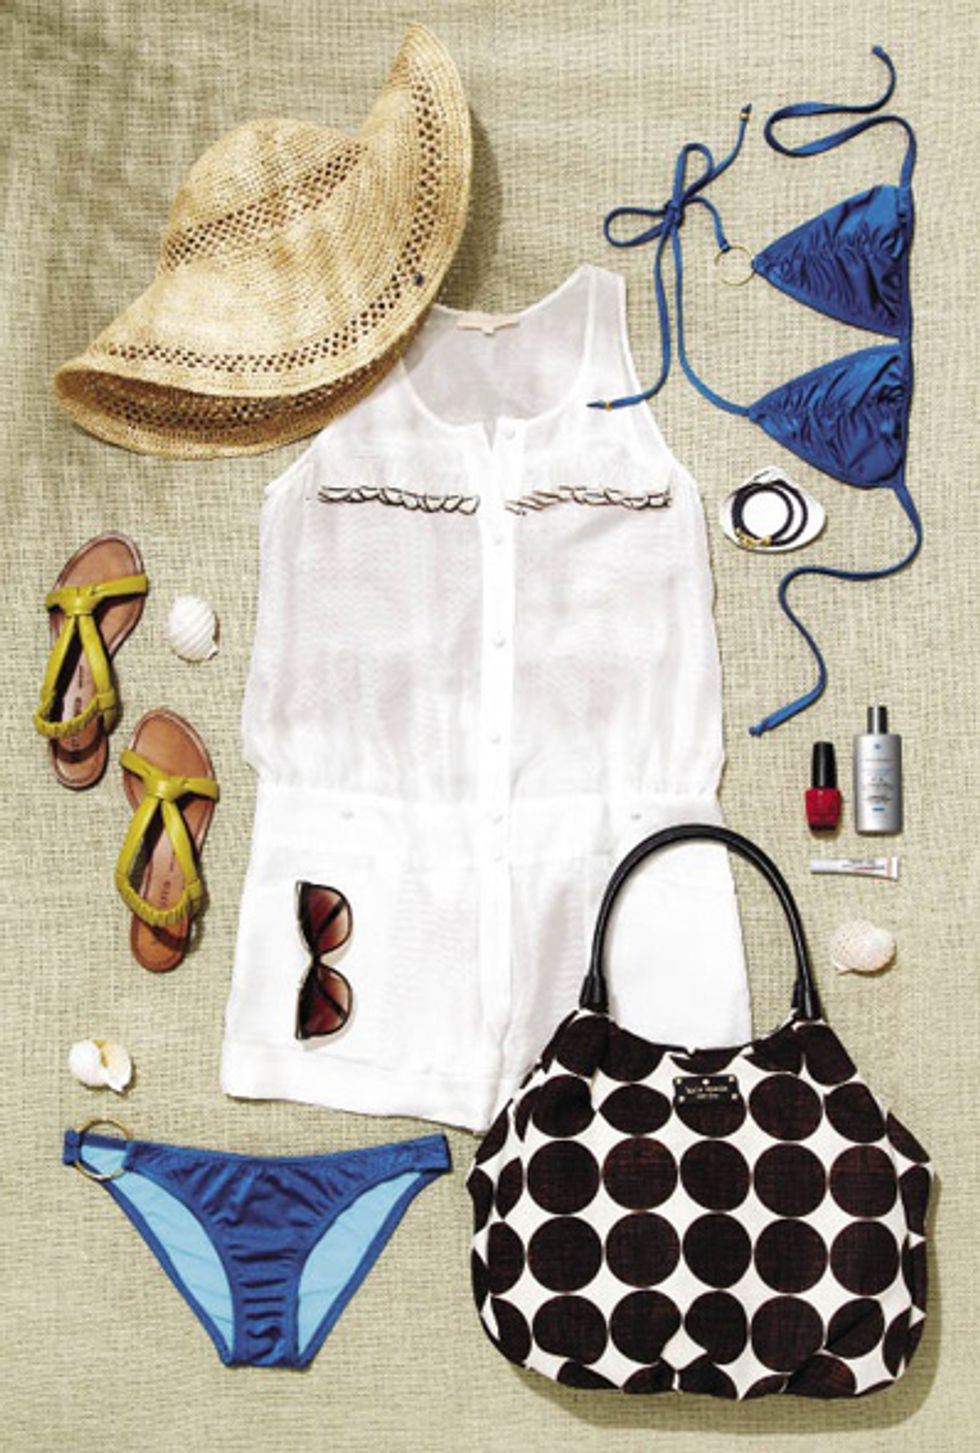 10 Beach Essentials to Hit the Sand in Style